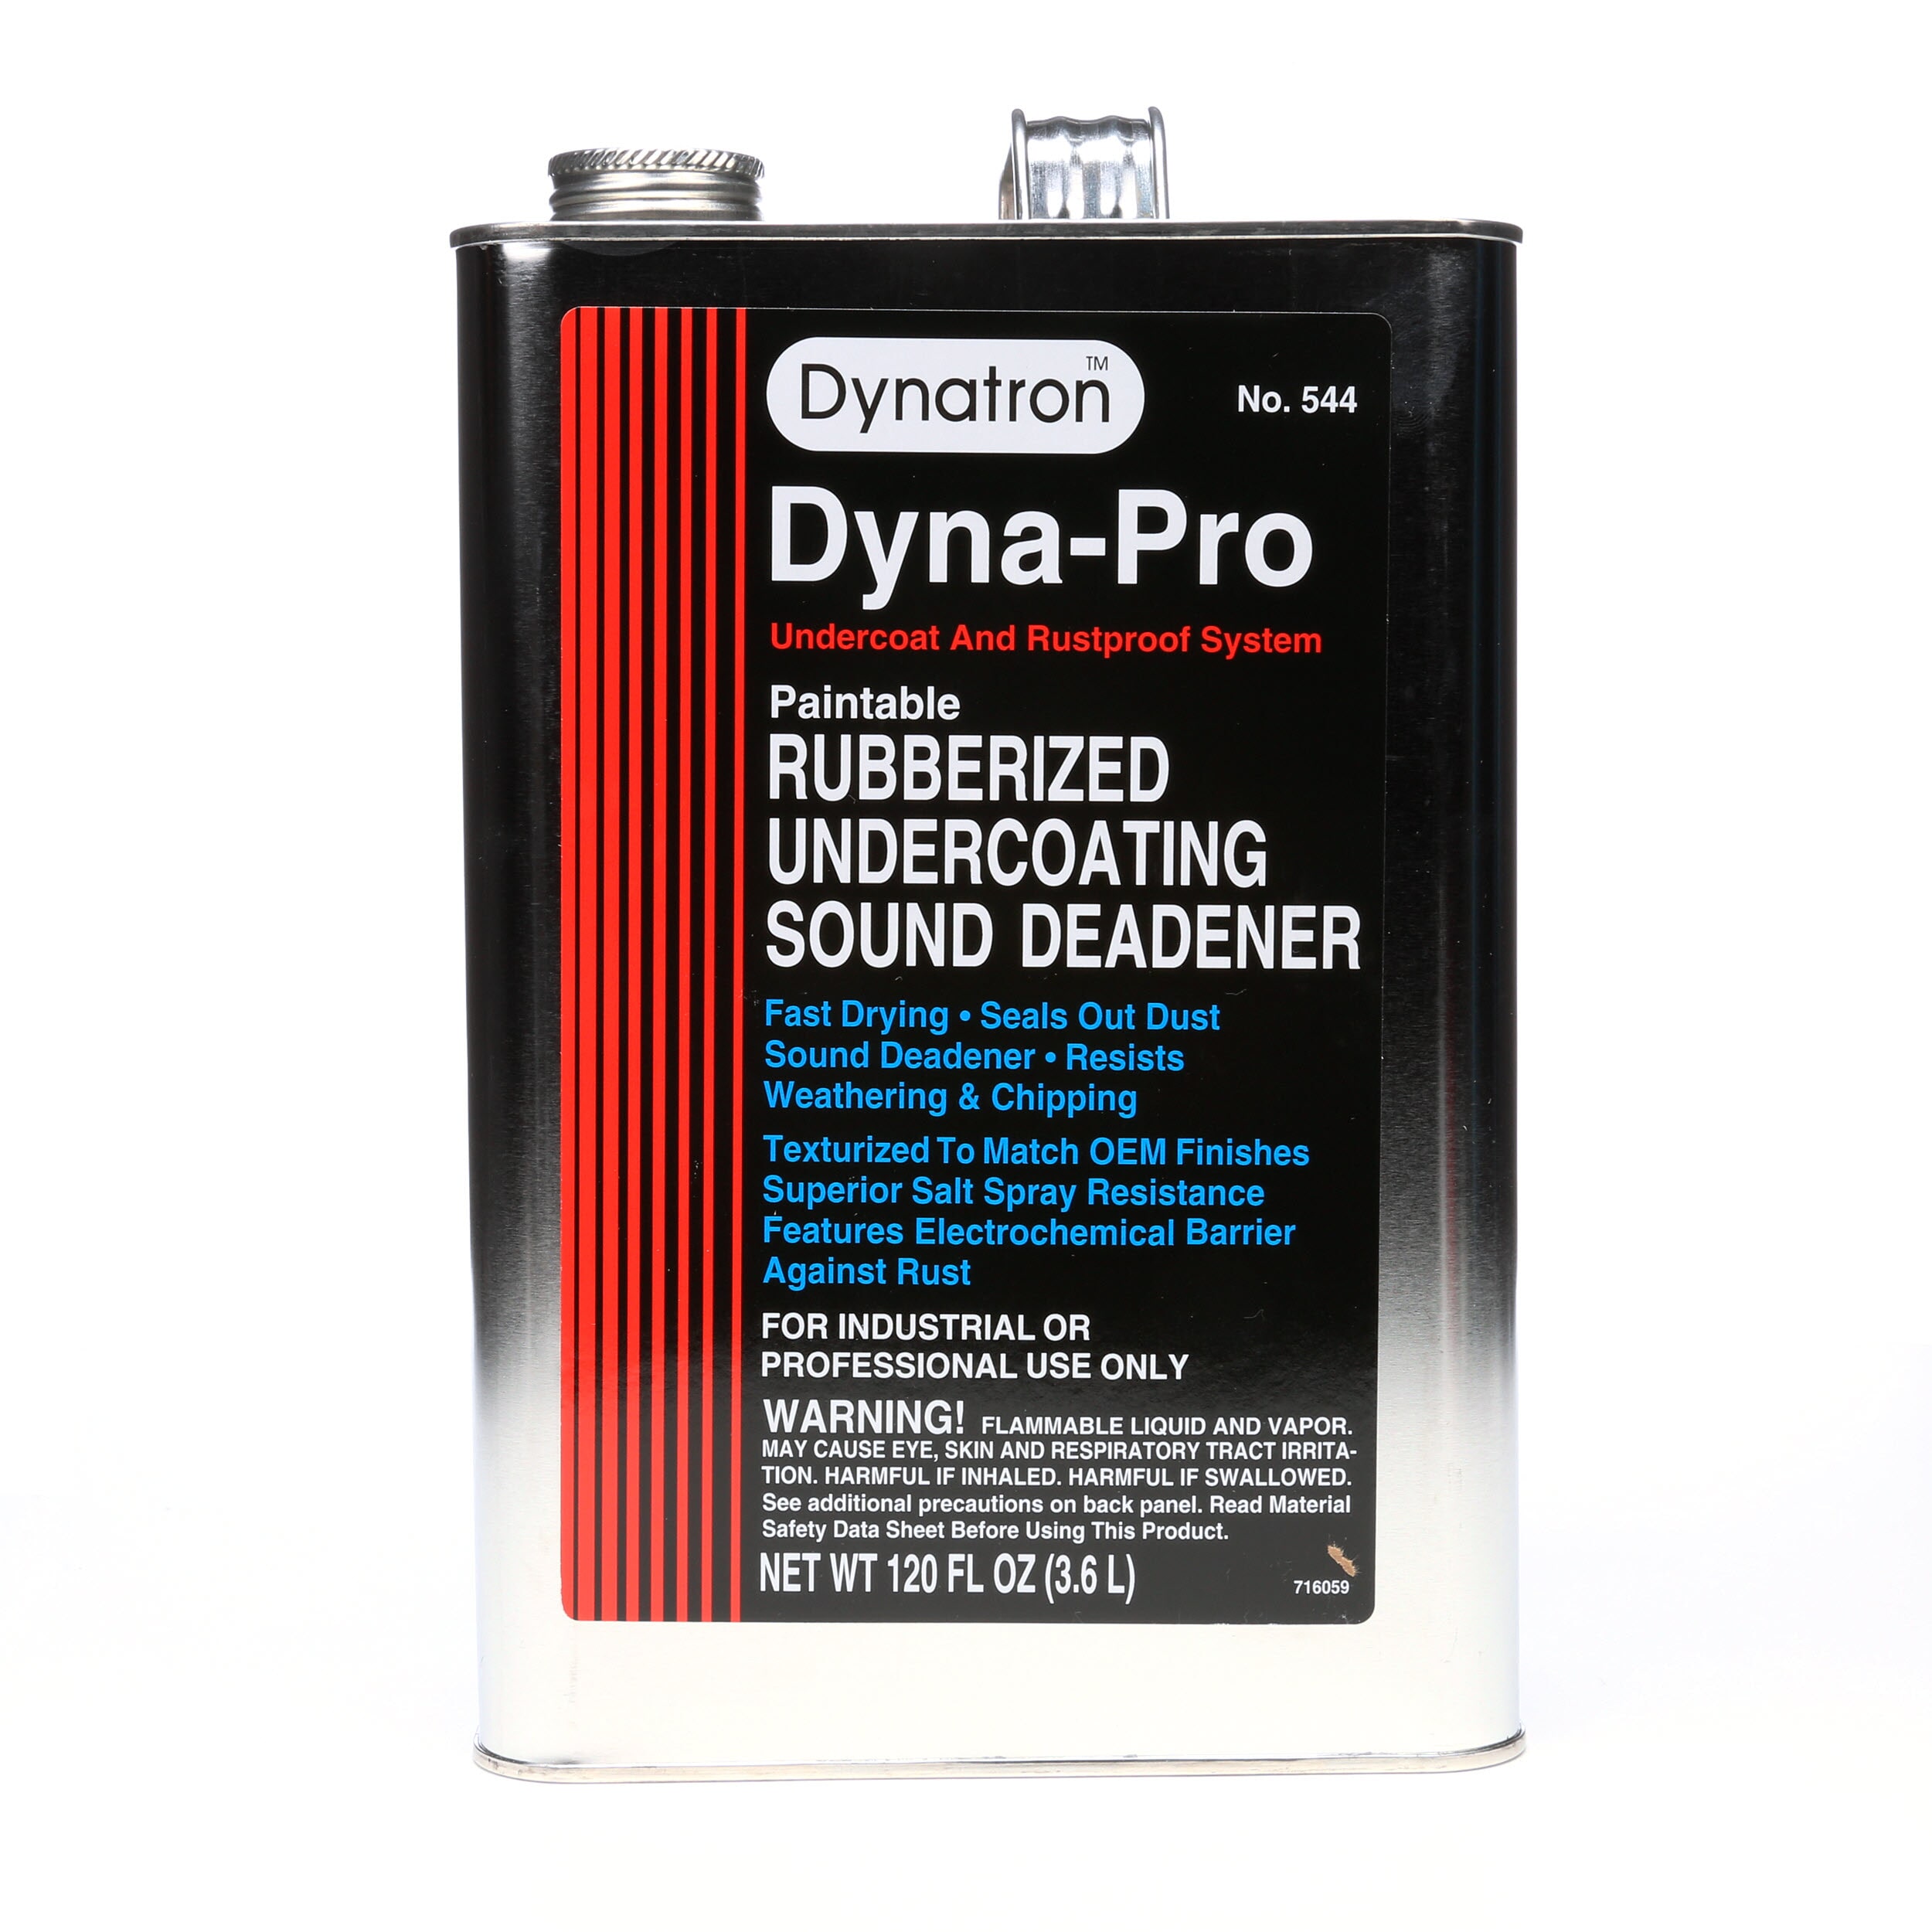 3M 7100142943 Dyna-Pro Rubberized Undercoating, 1 gal Container, Liquid Form, Black, 300 sq-ft Coverage, 1 to 2 hr Curing